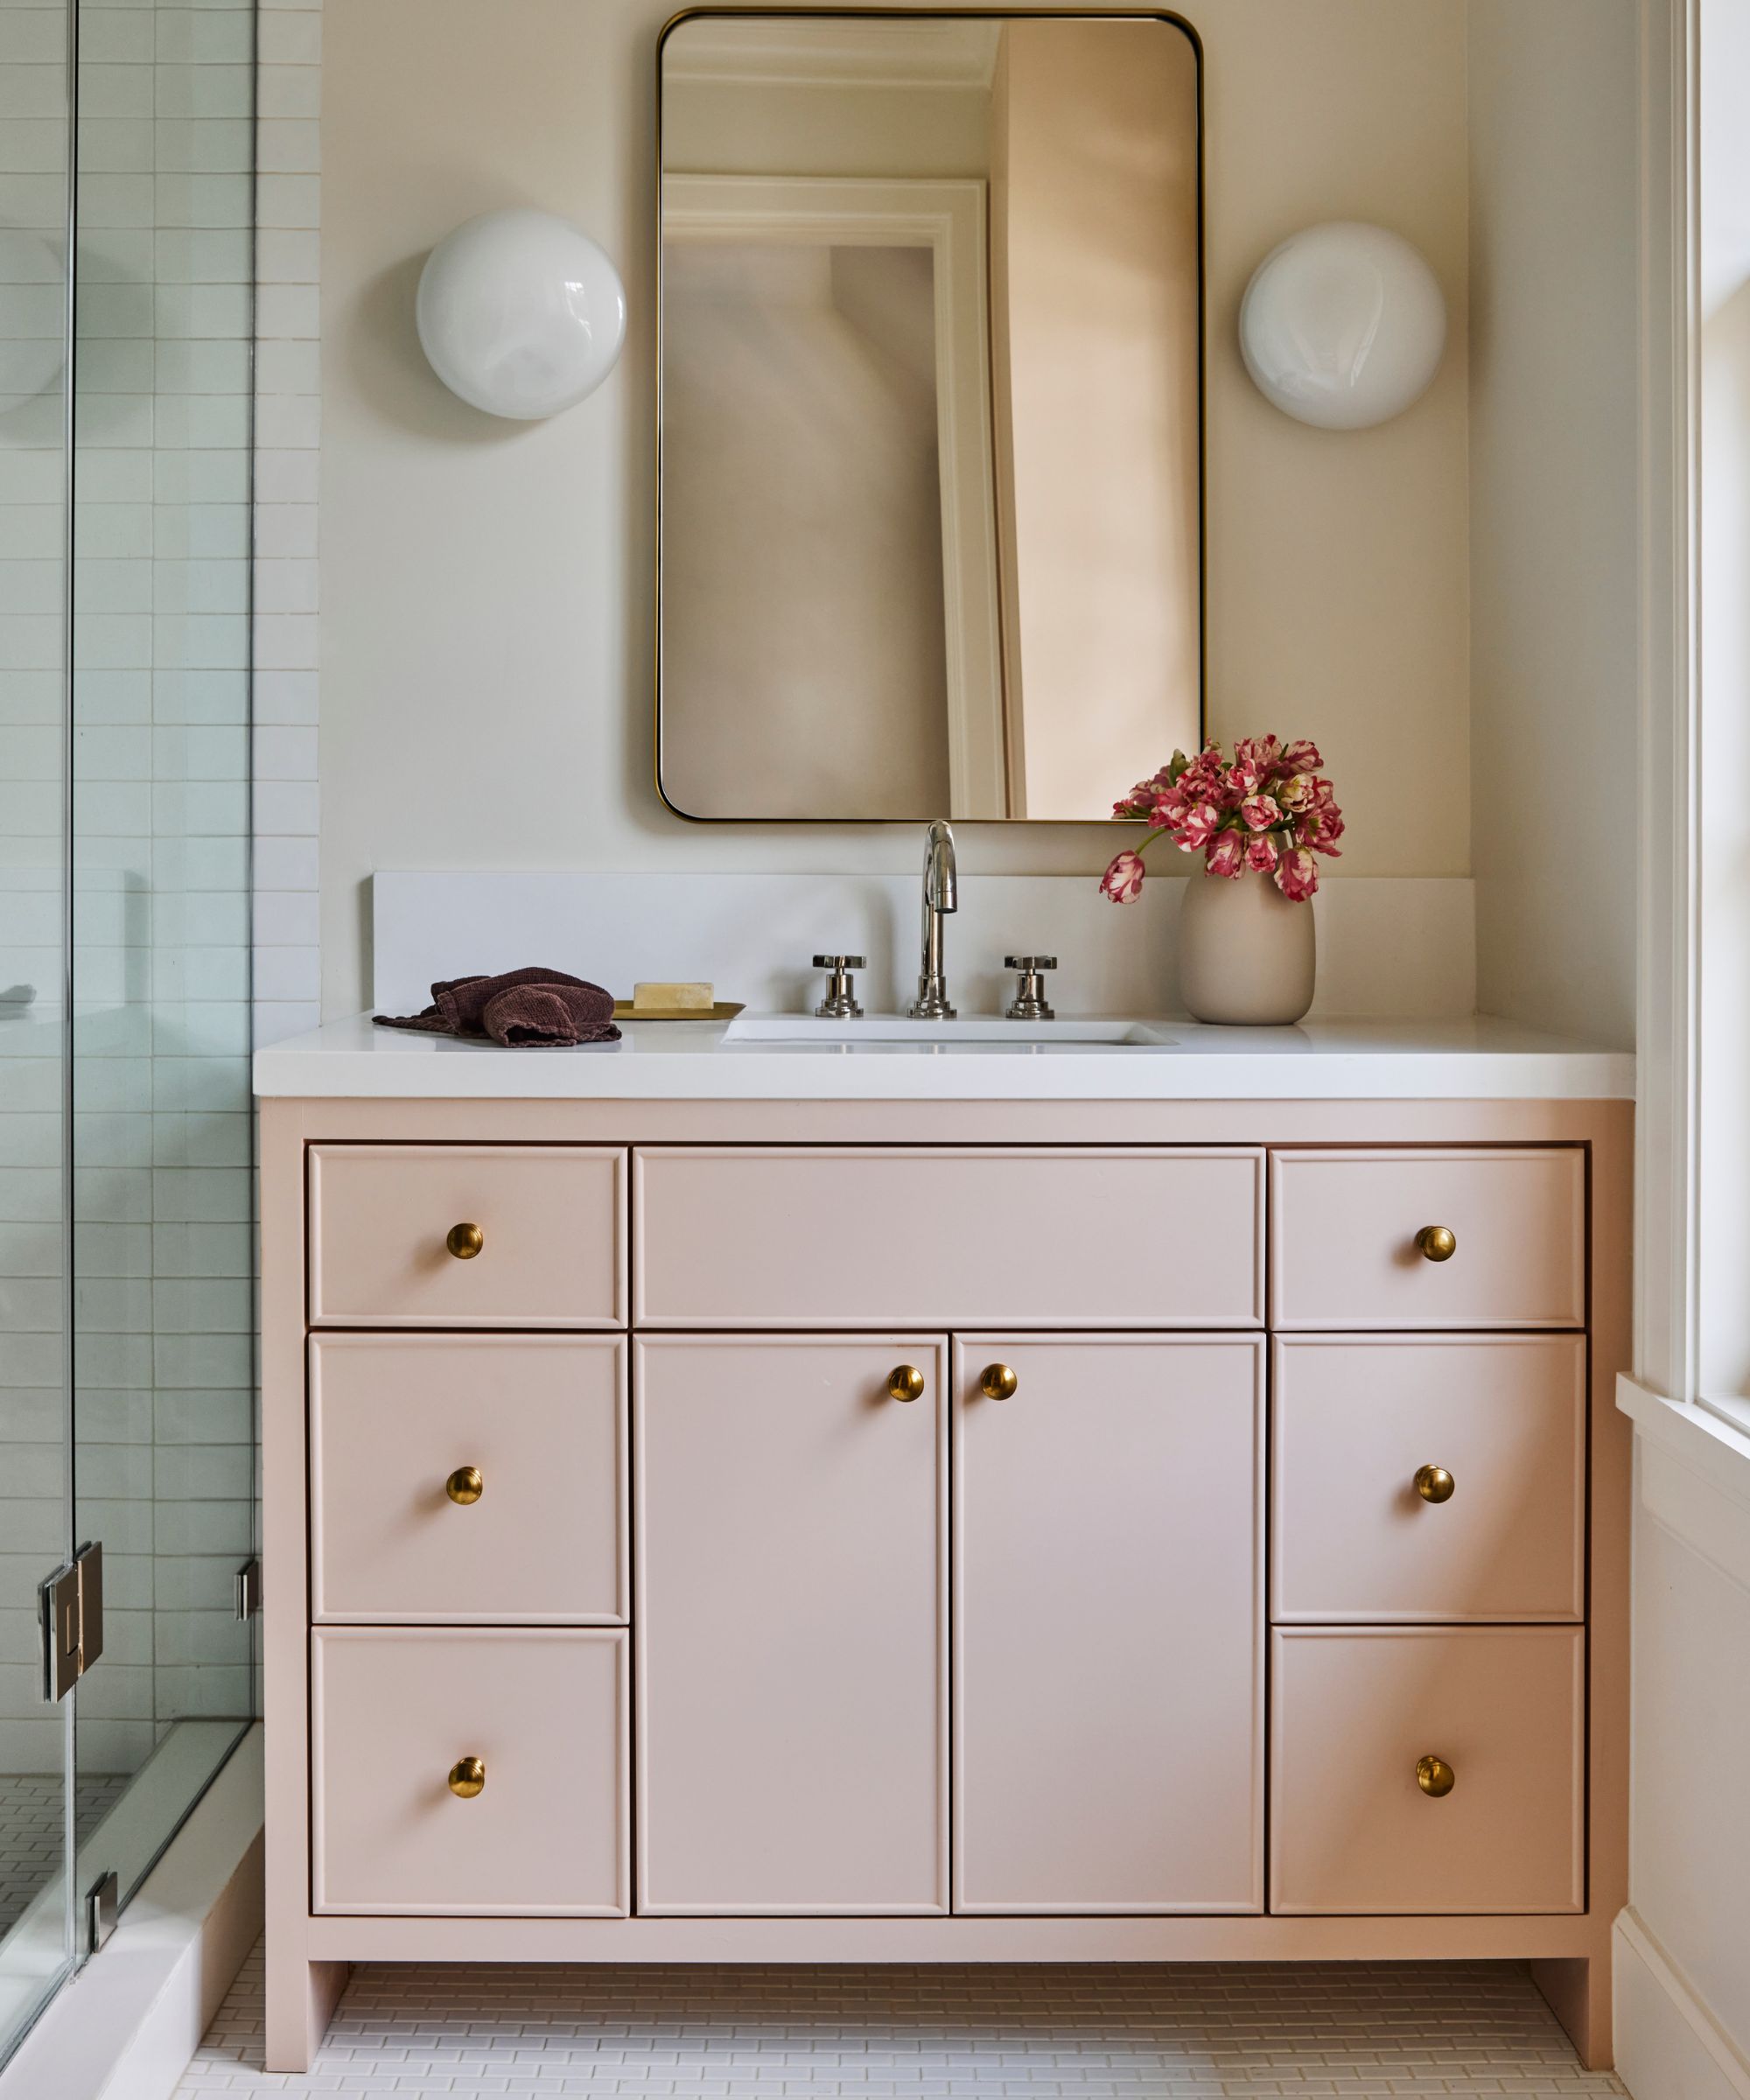 A bathroom with white mosaic tiles on the floor and a light pink vanity